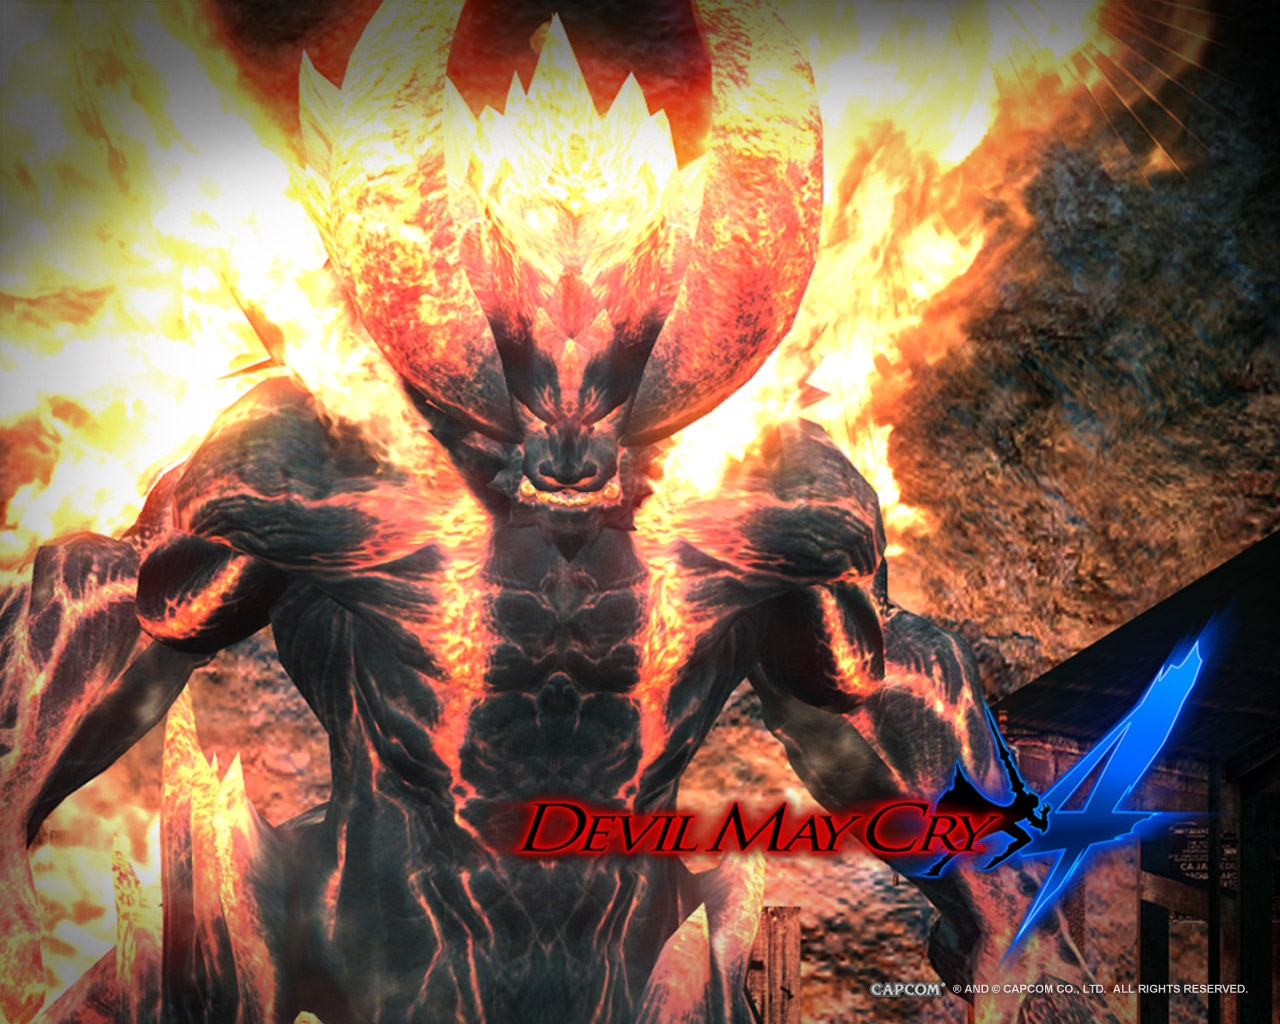 Download High quality Devil May Cry 4 wallpaper / Games / 1280x1024